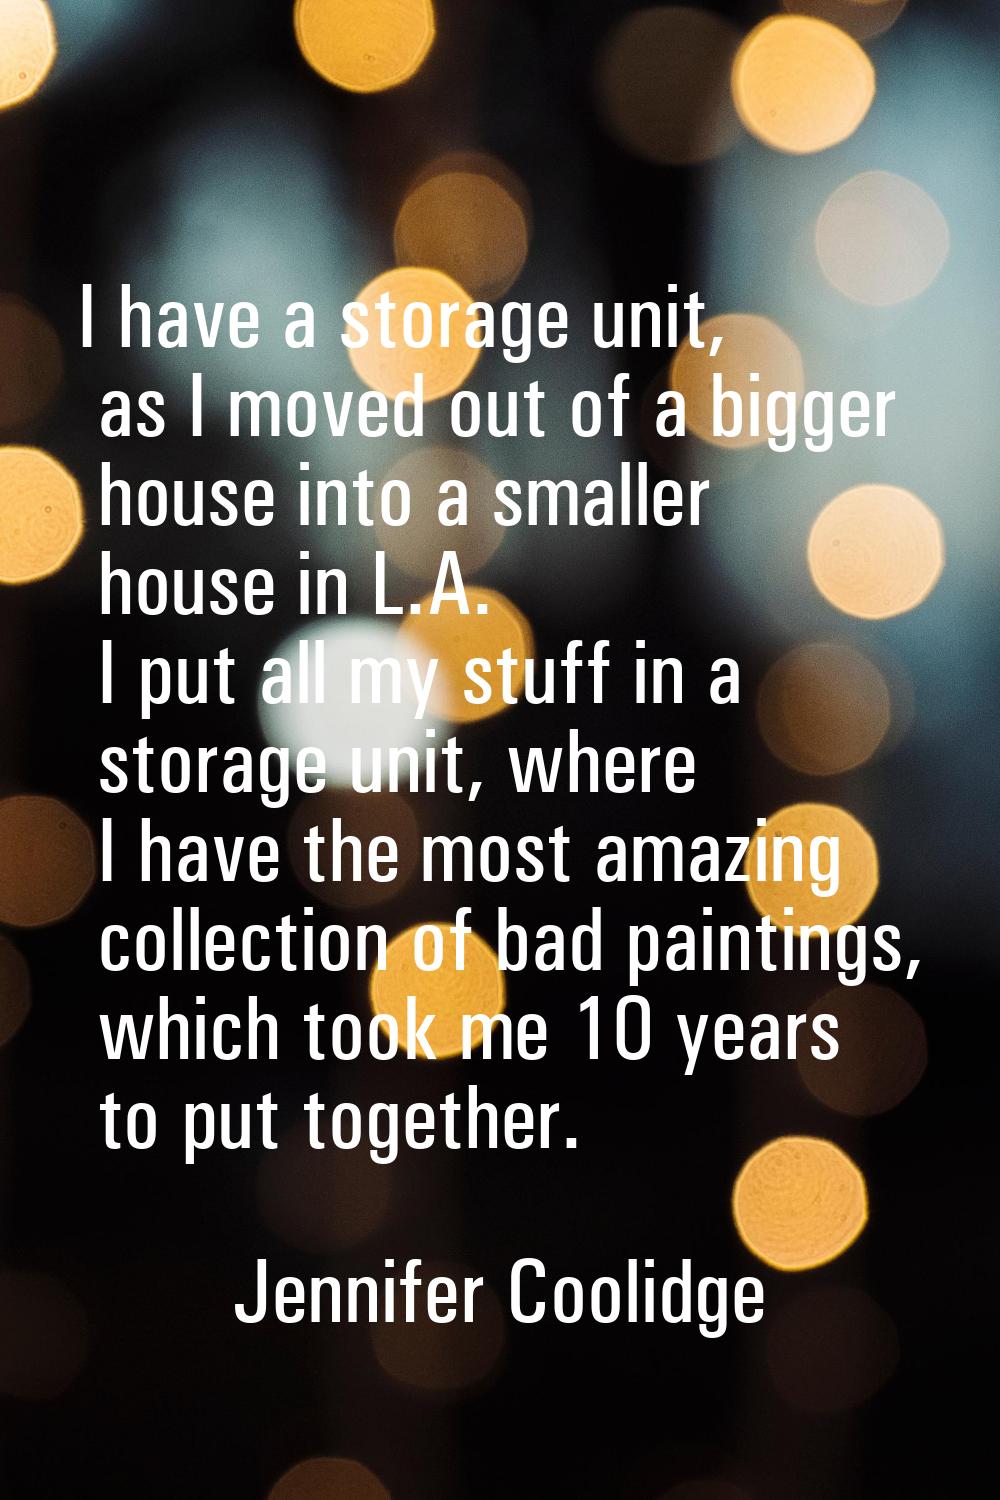 I have a storage unit, as I moved out of a bigger house into a smaller house in L.A. I put all my s